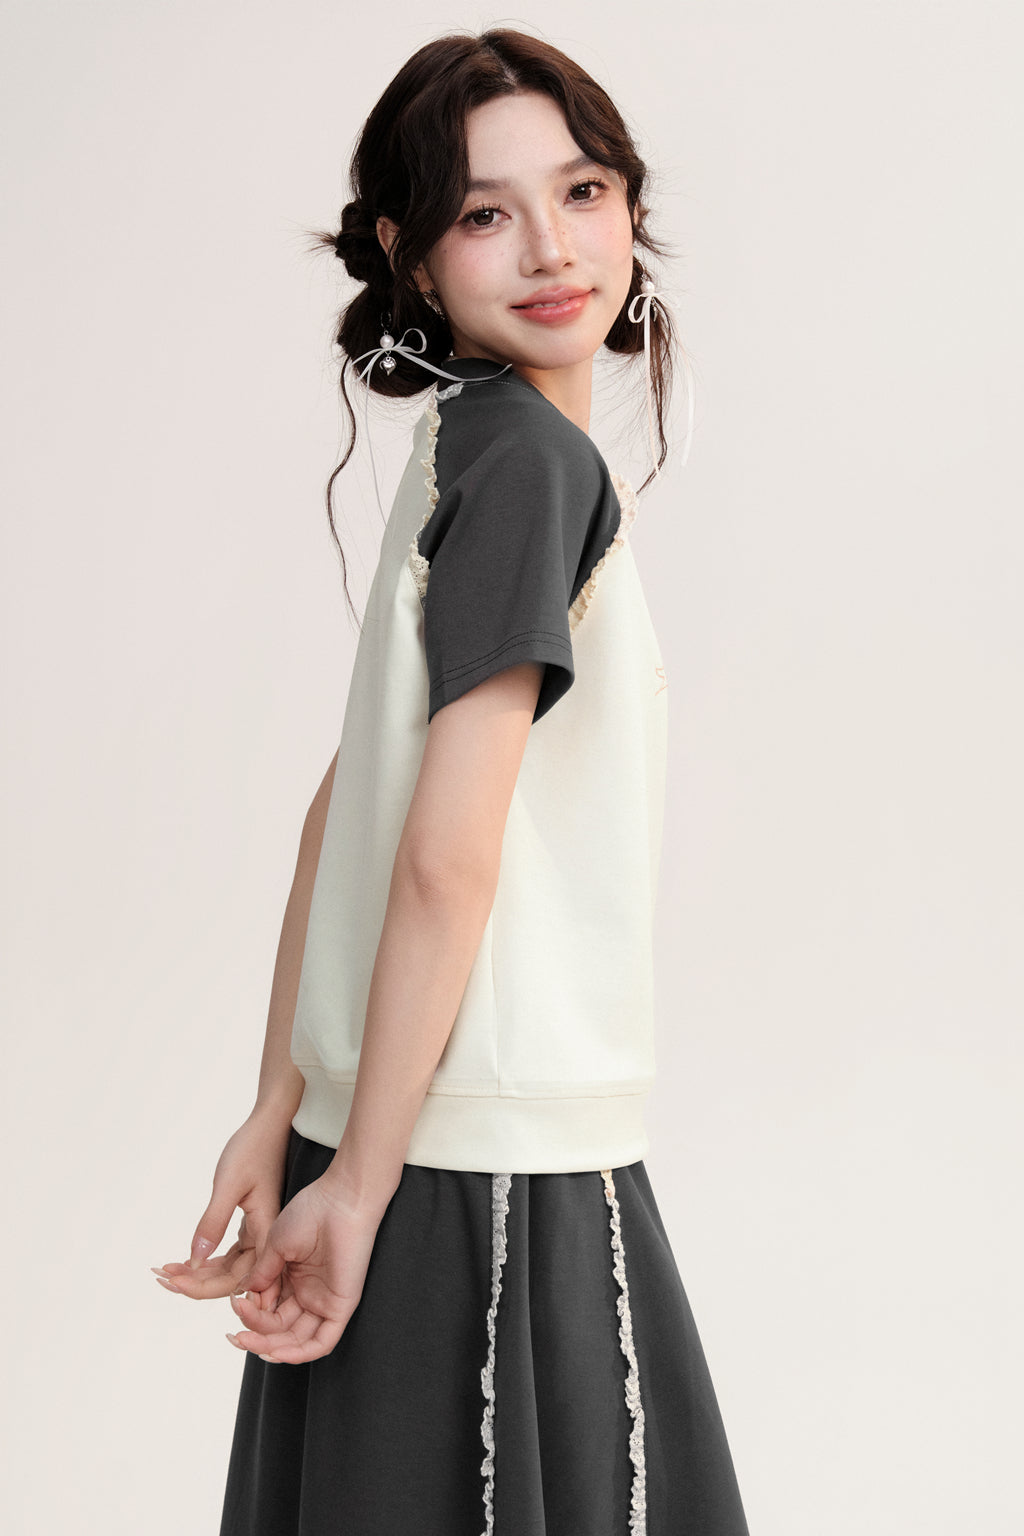 Lace Bow Short Sleeve T-shirt/Skirt AOO0024